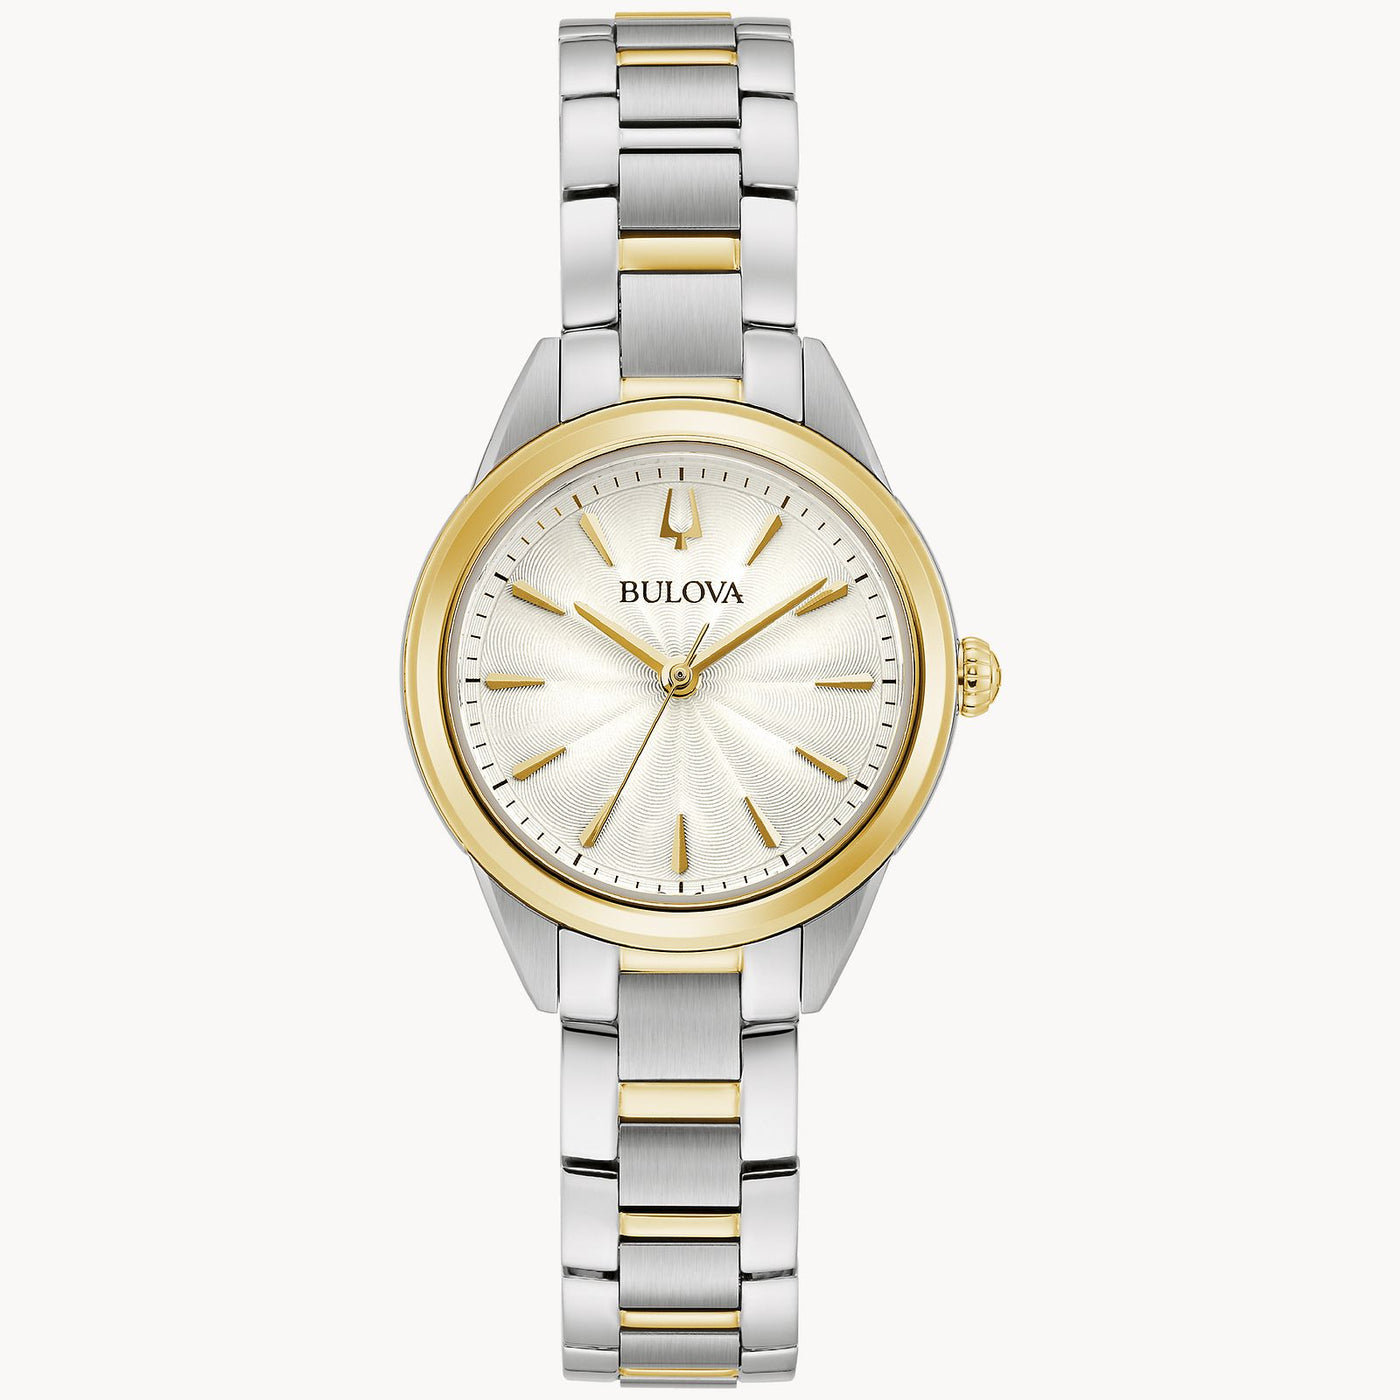 Lady's Silver and Gold Tone Bulova "Sutton" Watch